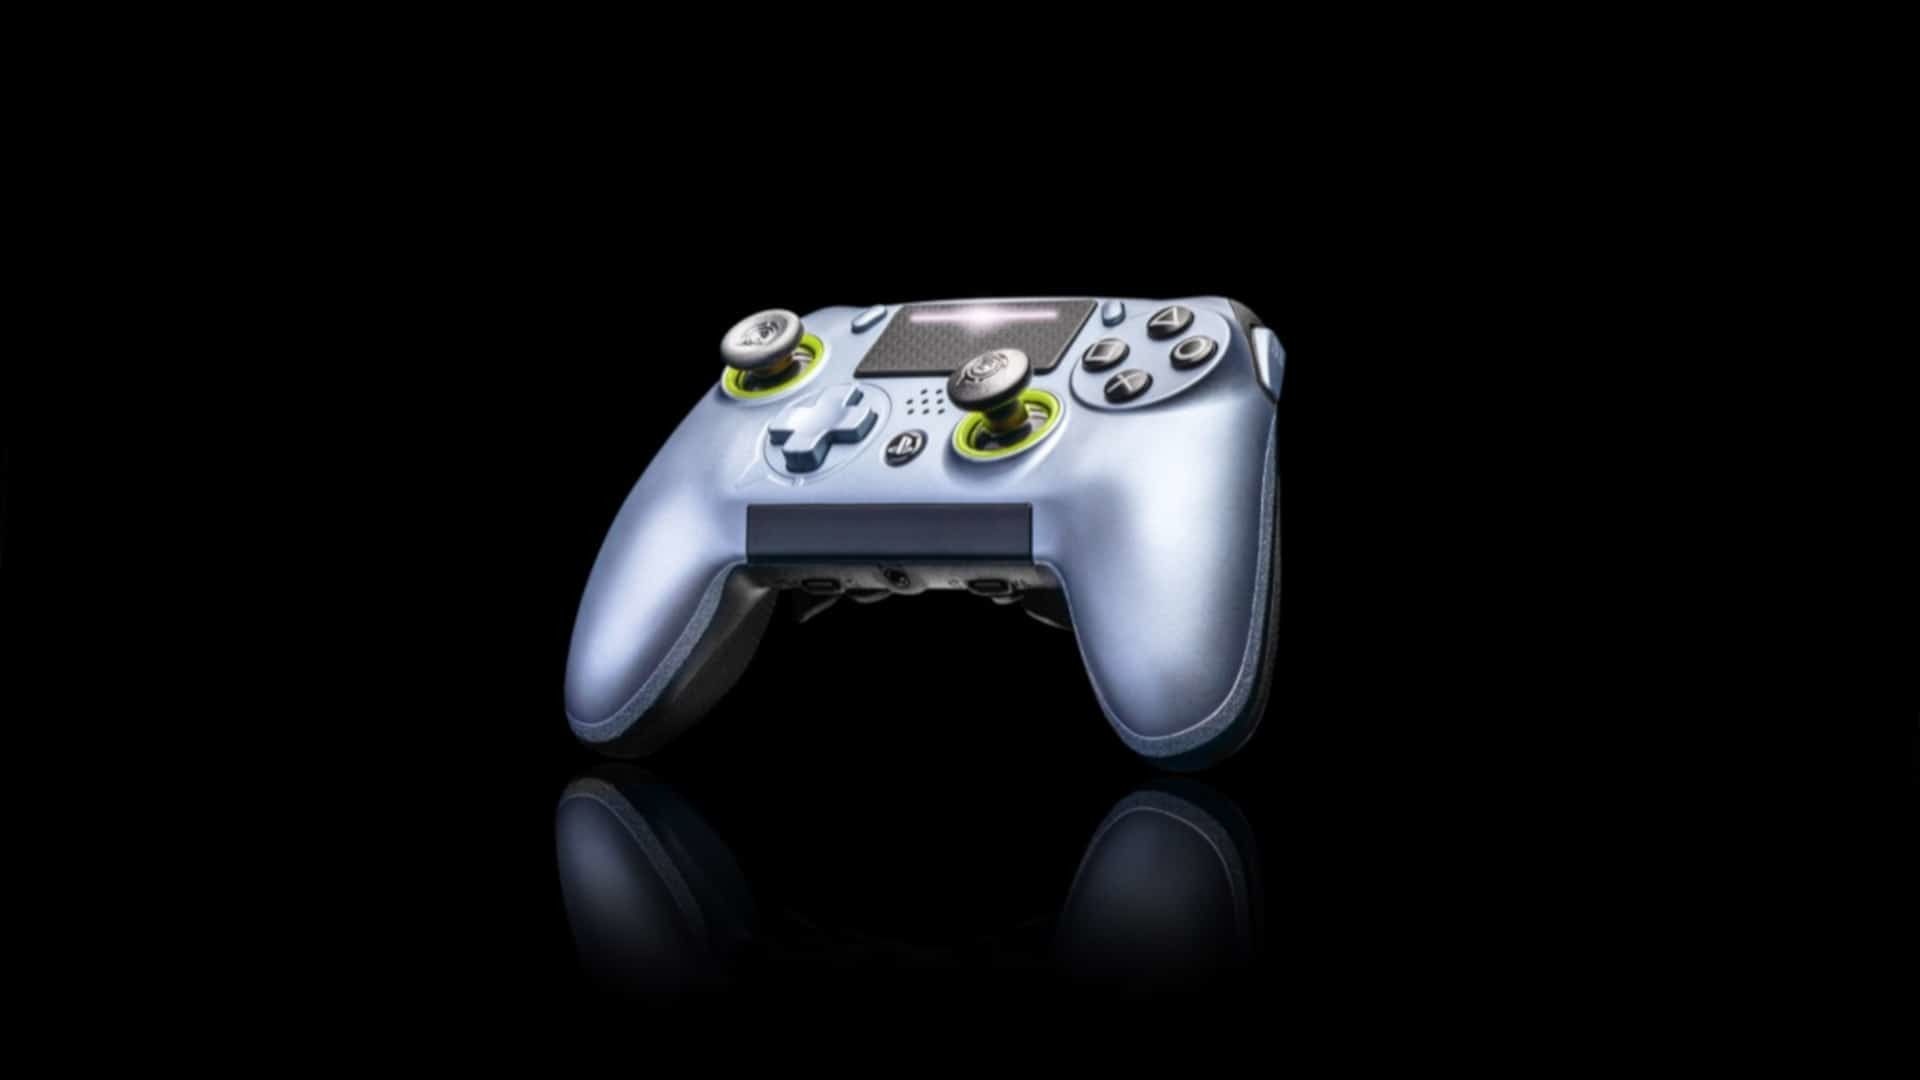 Scuf States That The New Features Added To The Controller